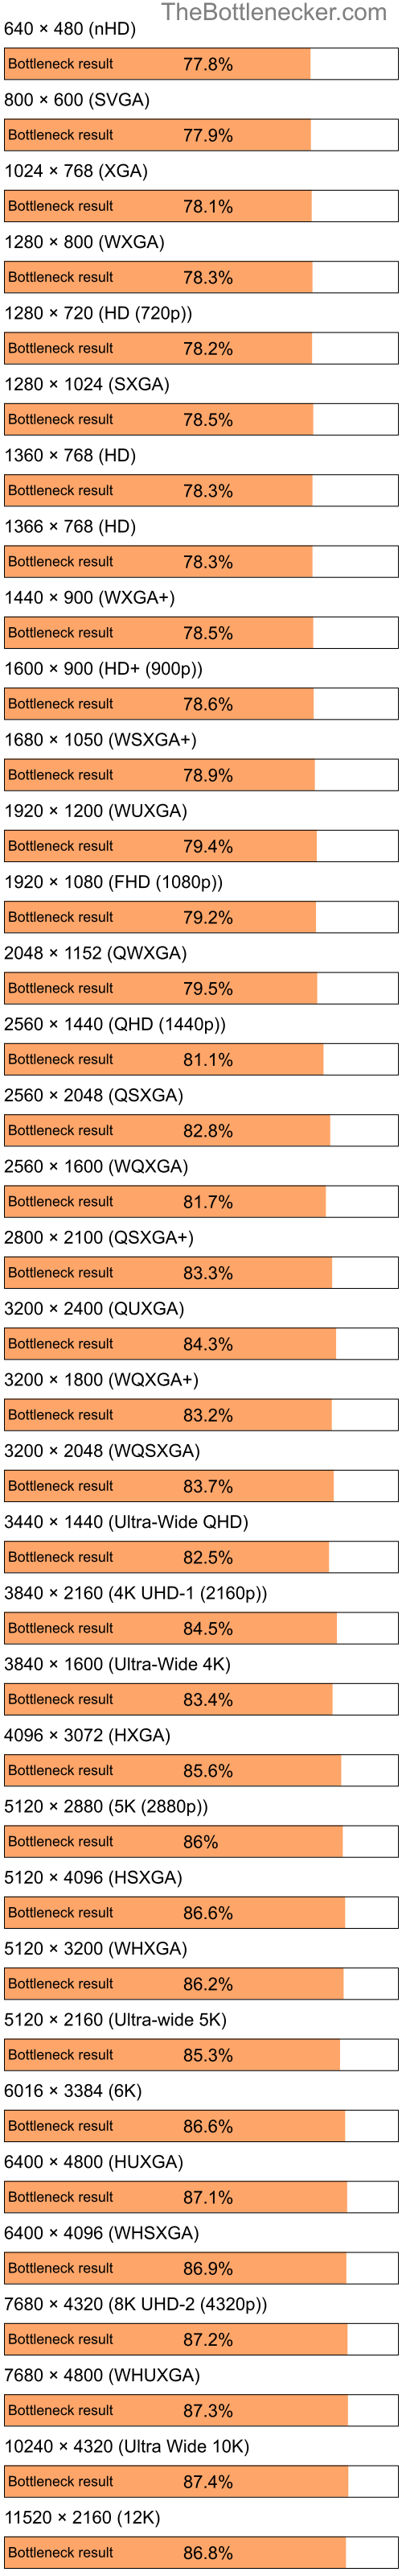 Bottleneck results by resolution for Intel Pentium 4 and NVIDIA nForce 630a in General Tasks